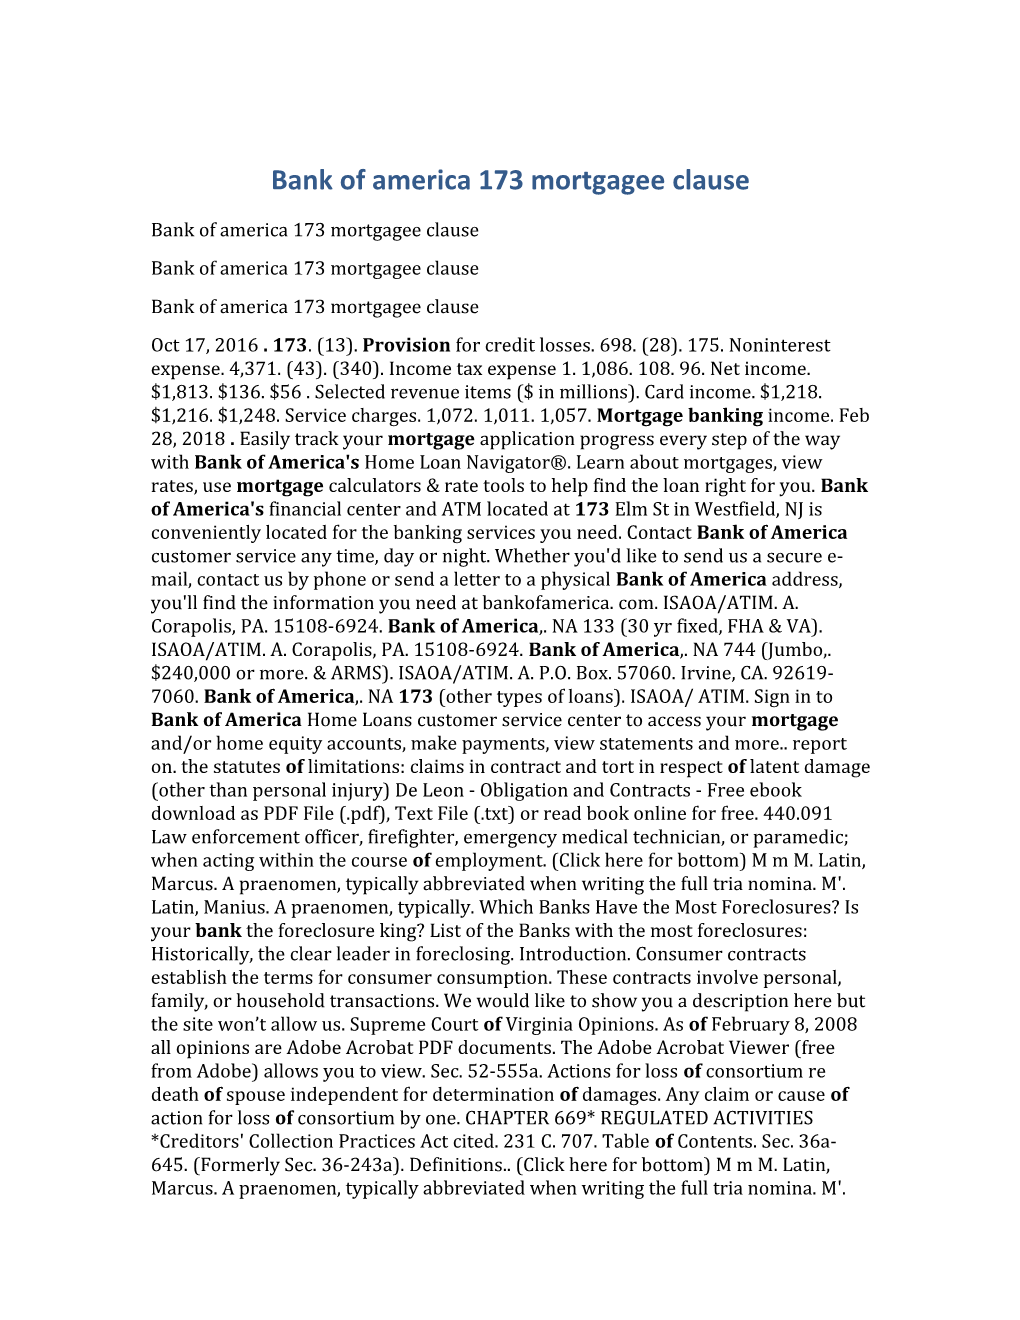 Bank of America 173 Mortgagee Clause